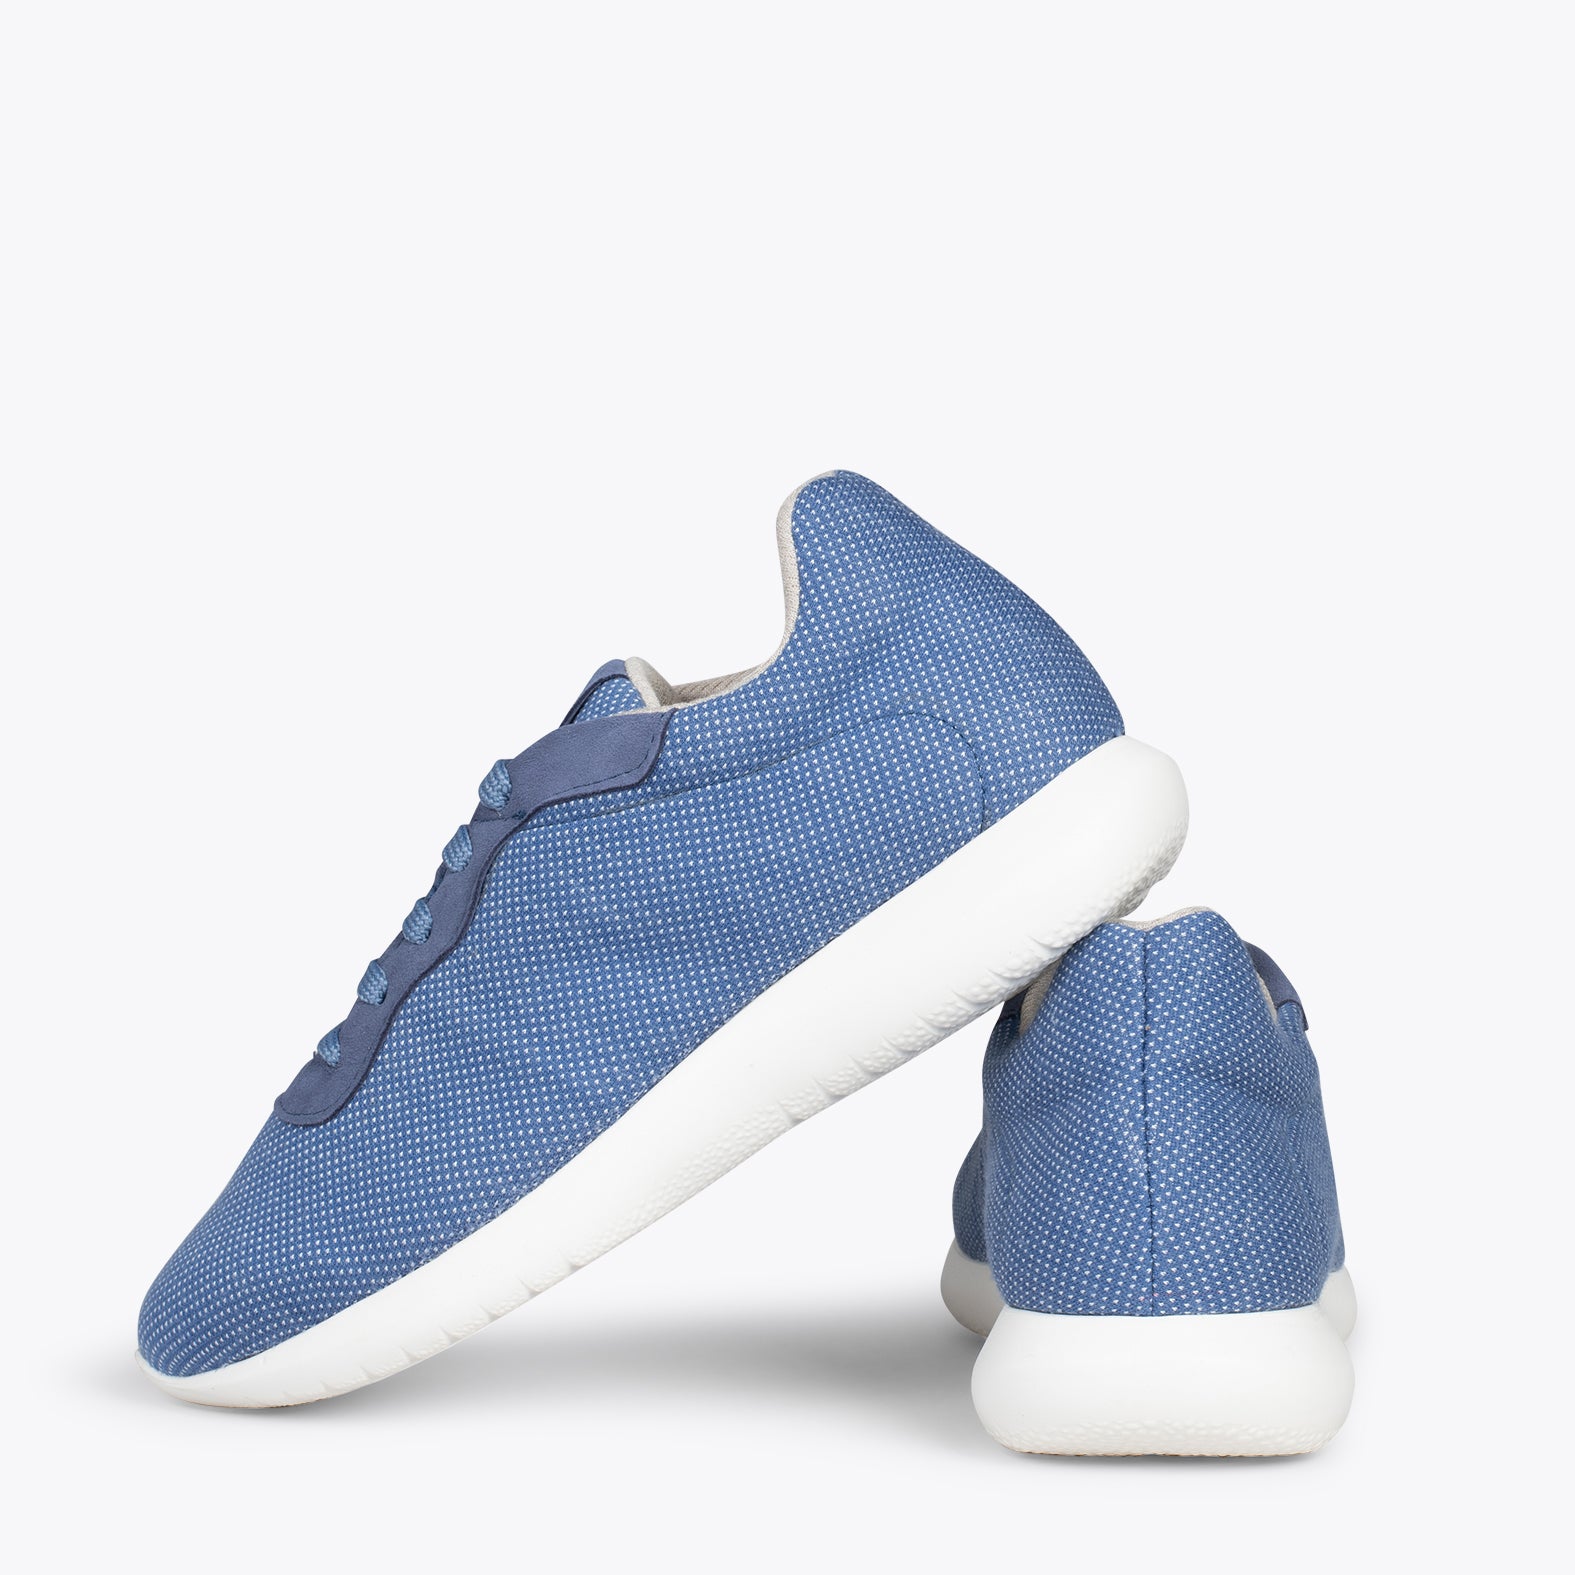 YOGA – JEANS sneakers crafted in merino wool